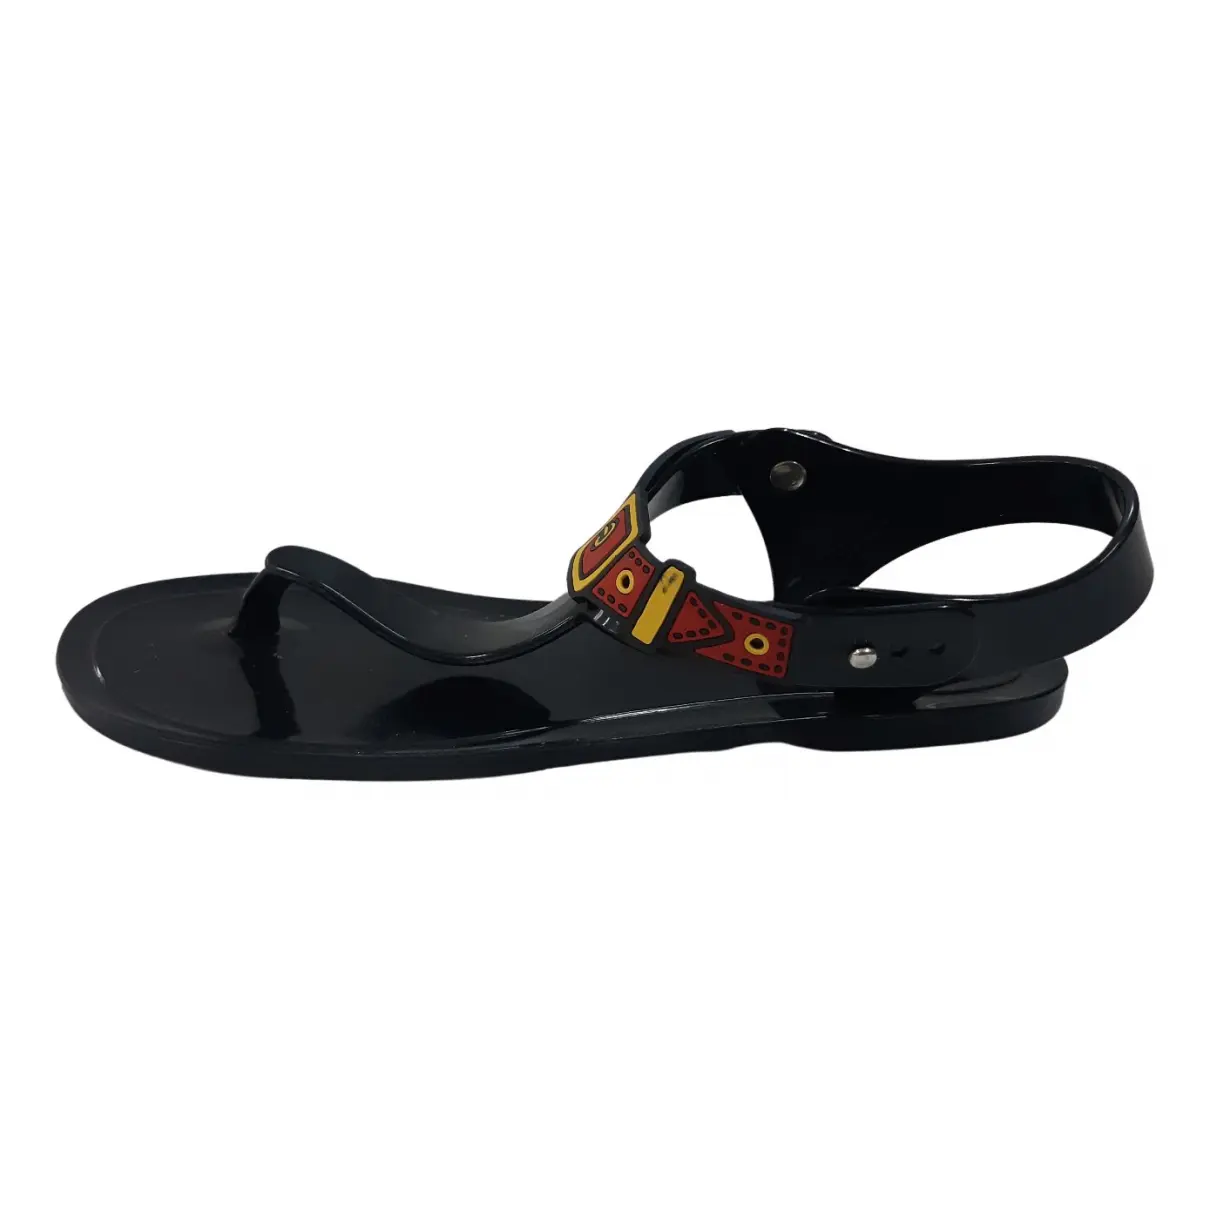 Patent leather flip flops Moschino